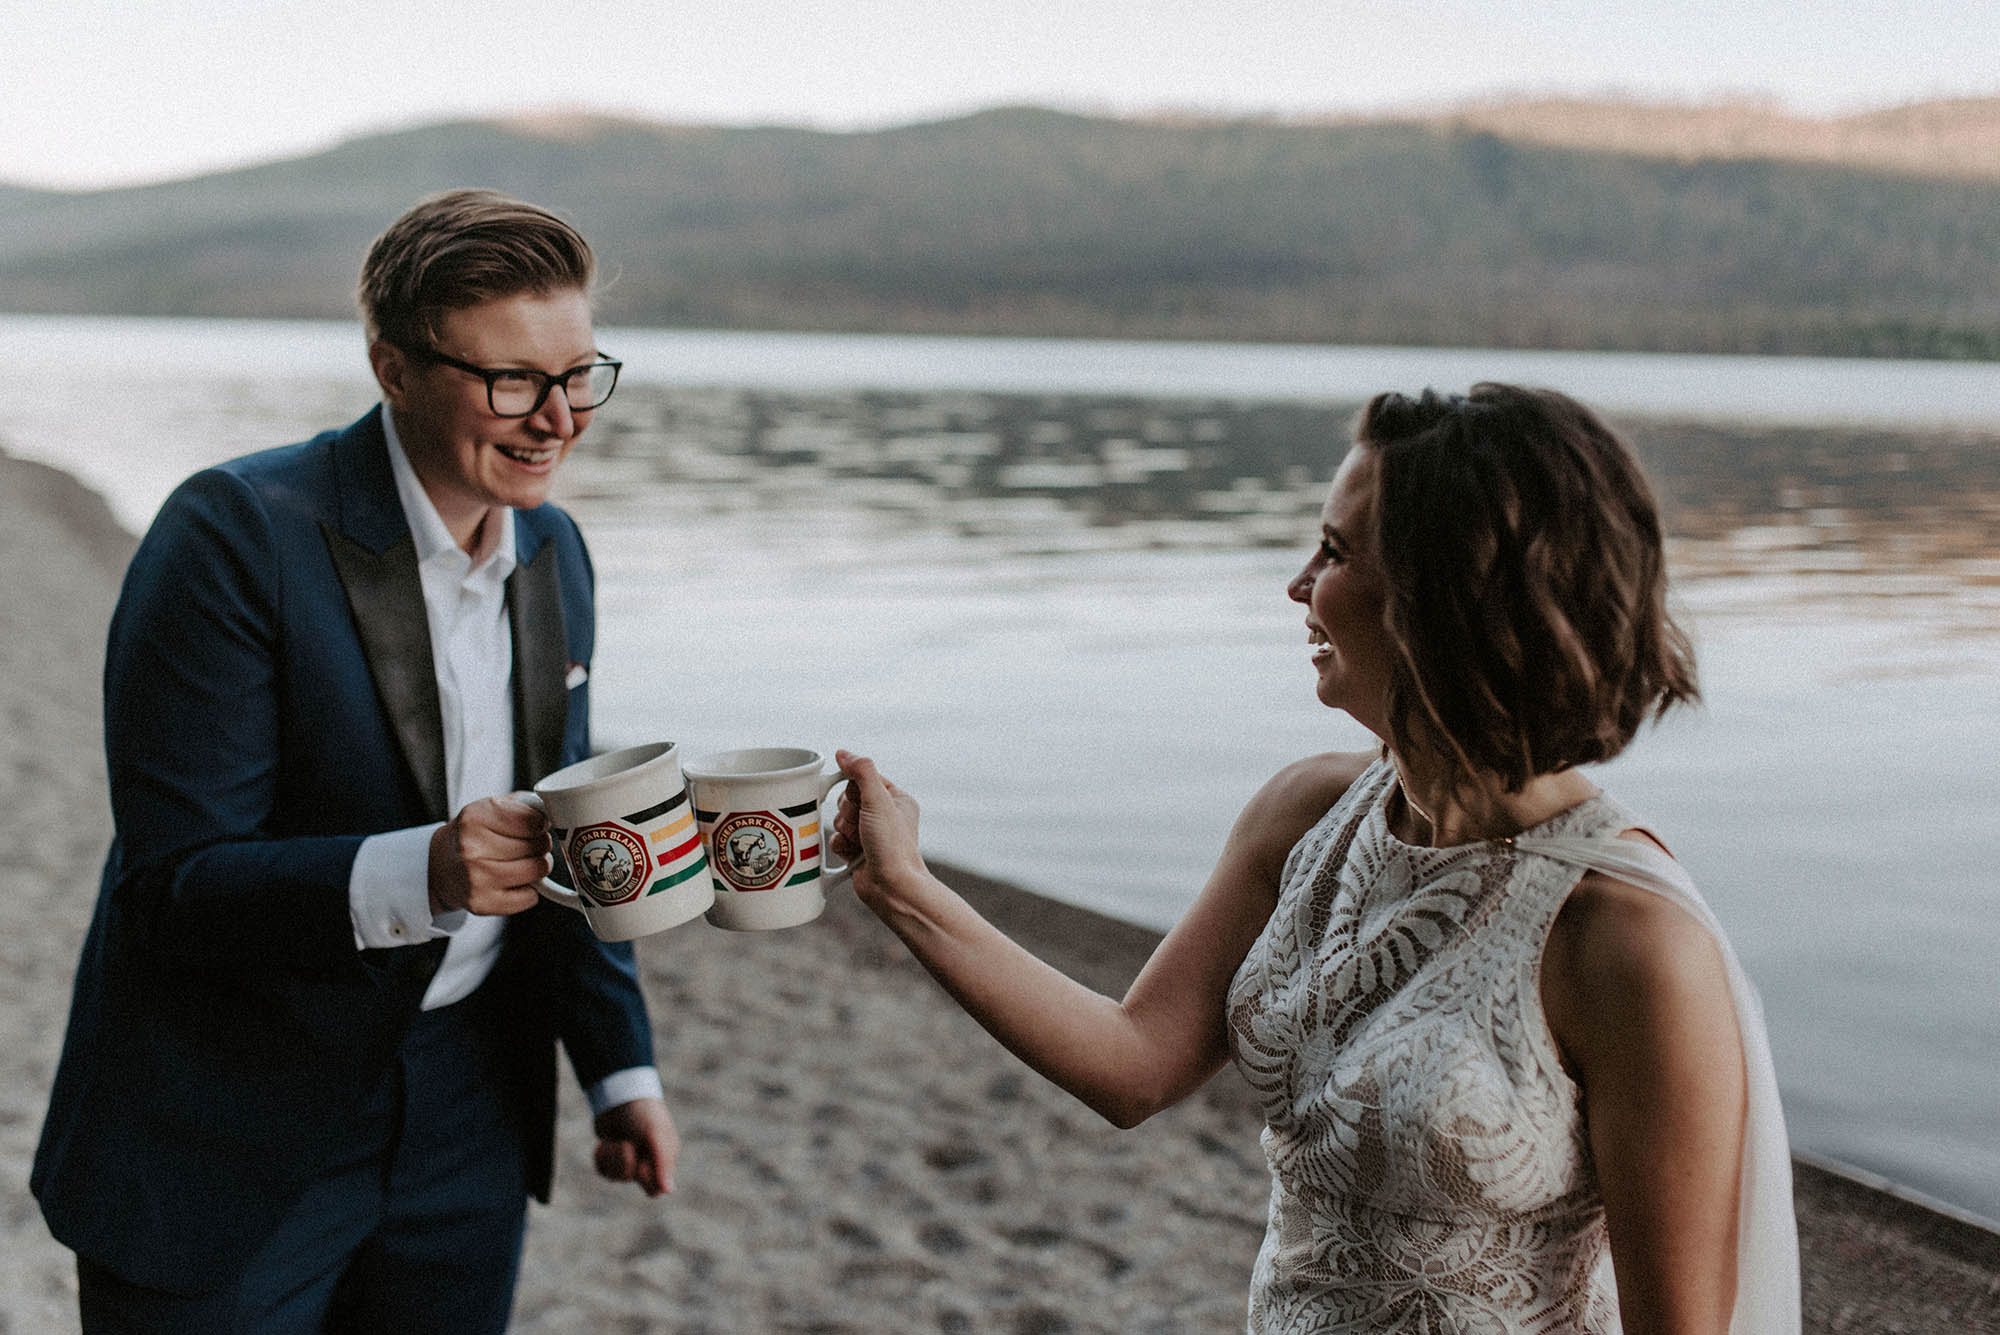 bride in tux and bride in wedding gown click coffee mugs at sunrise on Lake McDonald